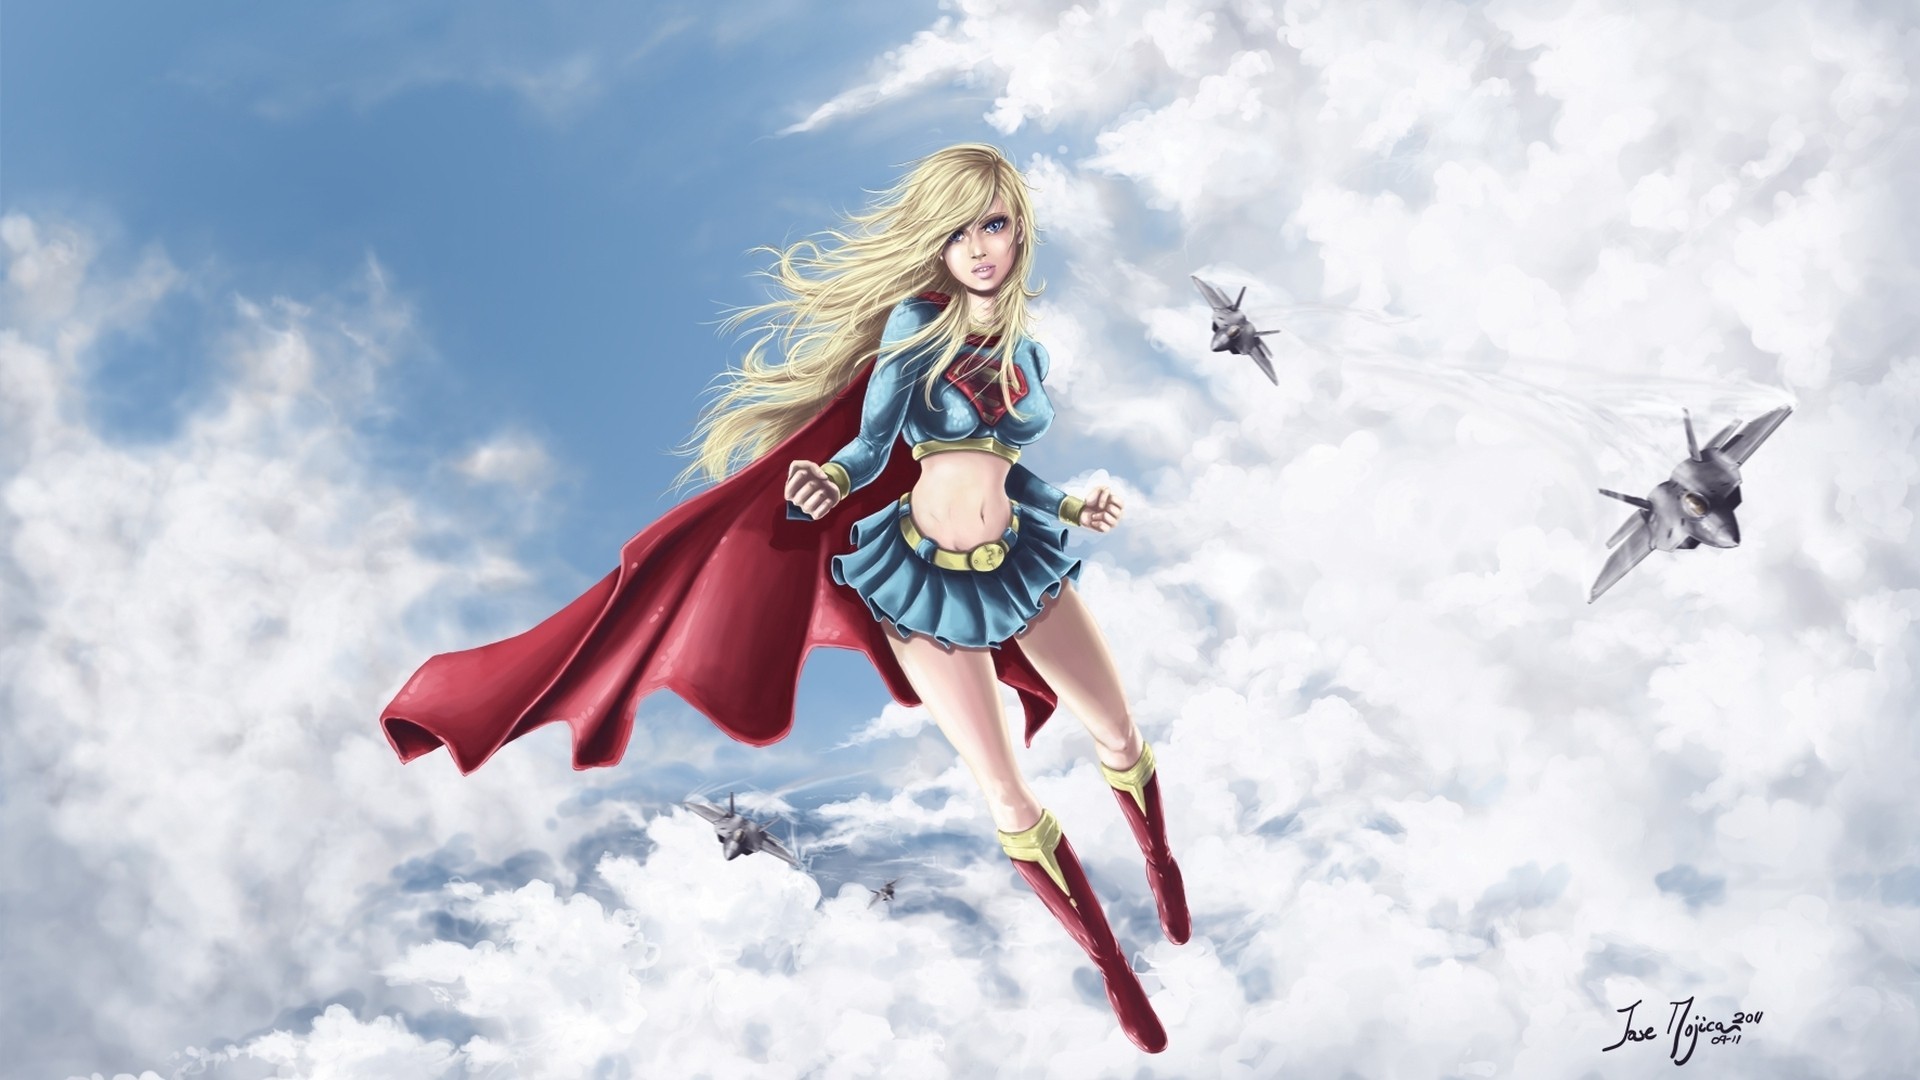 General 1920x1080 model aircraft vehicle military aircraft belly superheroines Supergirl legs cape women sky blonde flying artwork